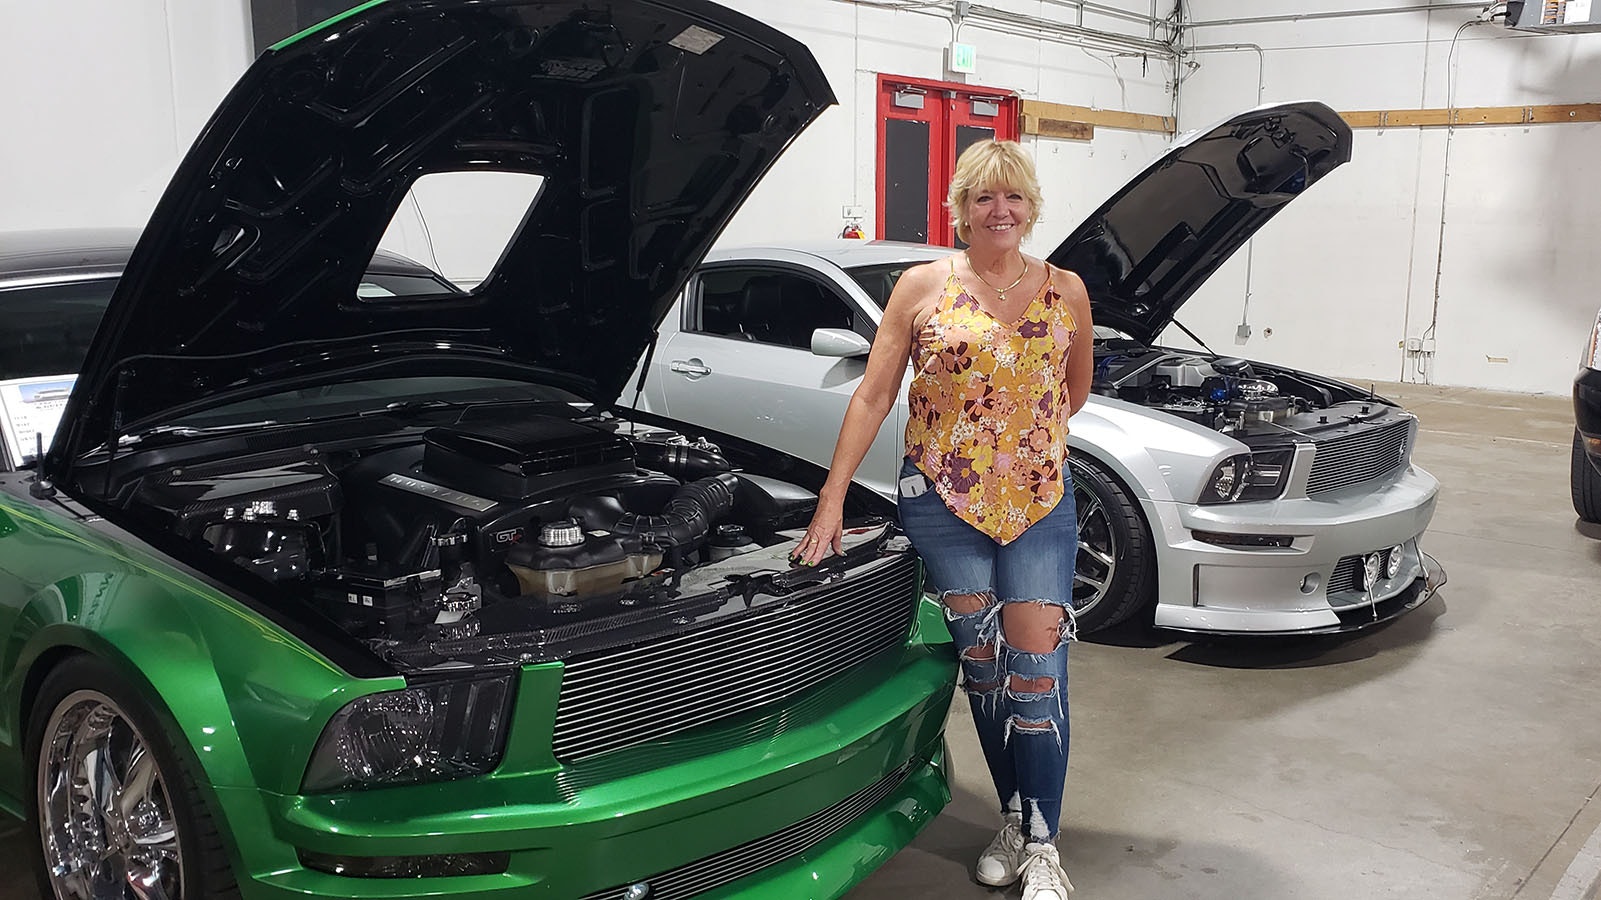 Brenda Treuthardt poses with the 2007 green Mustang she calls Sins of Envy.